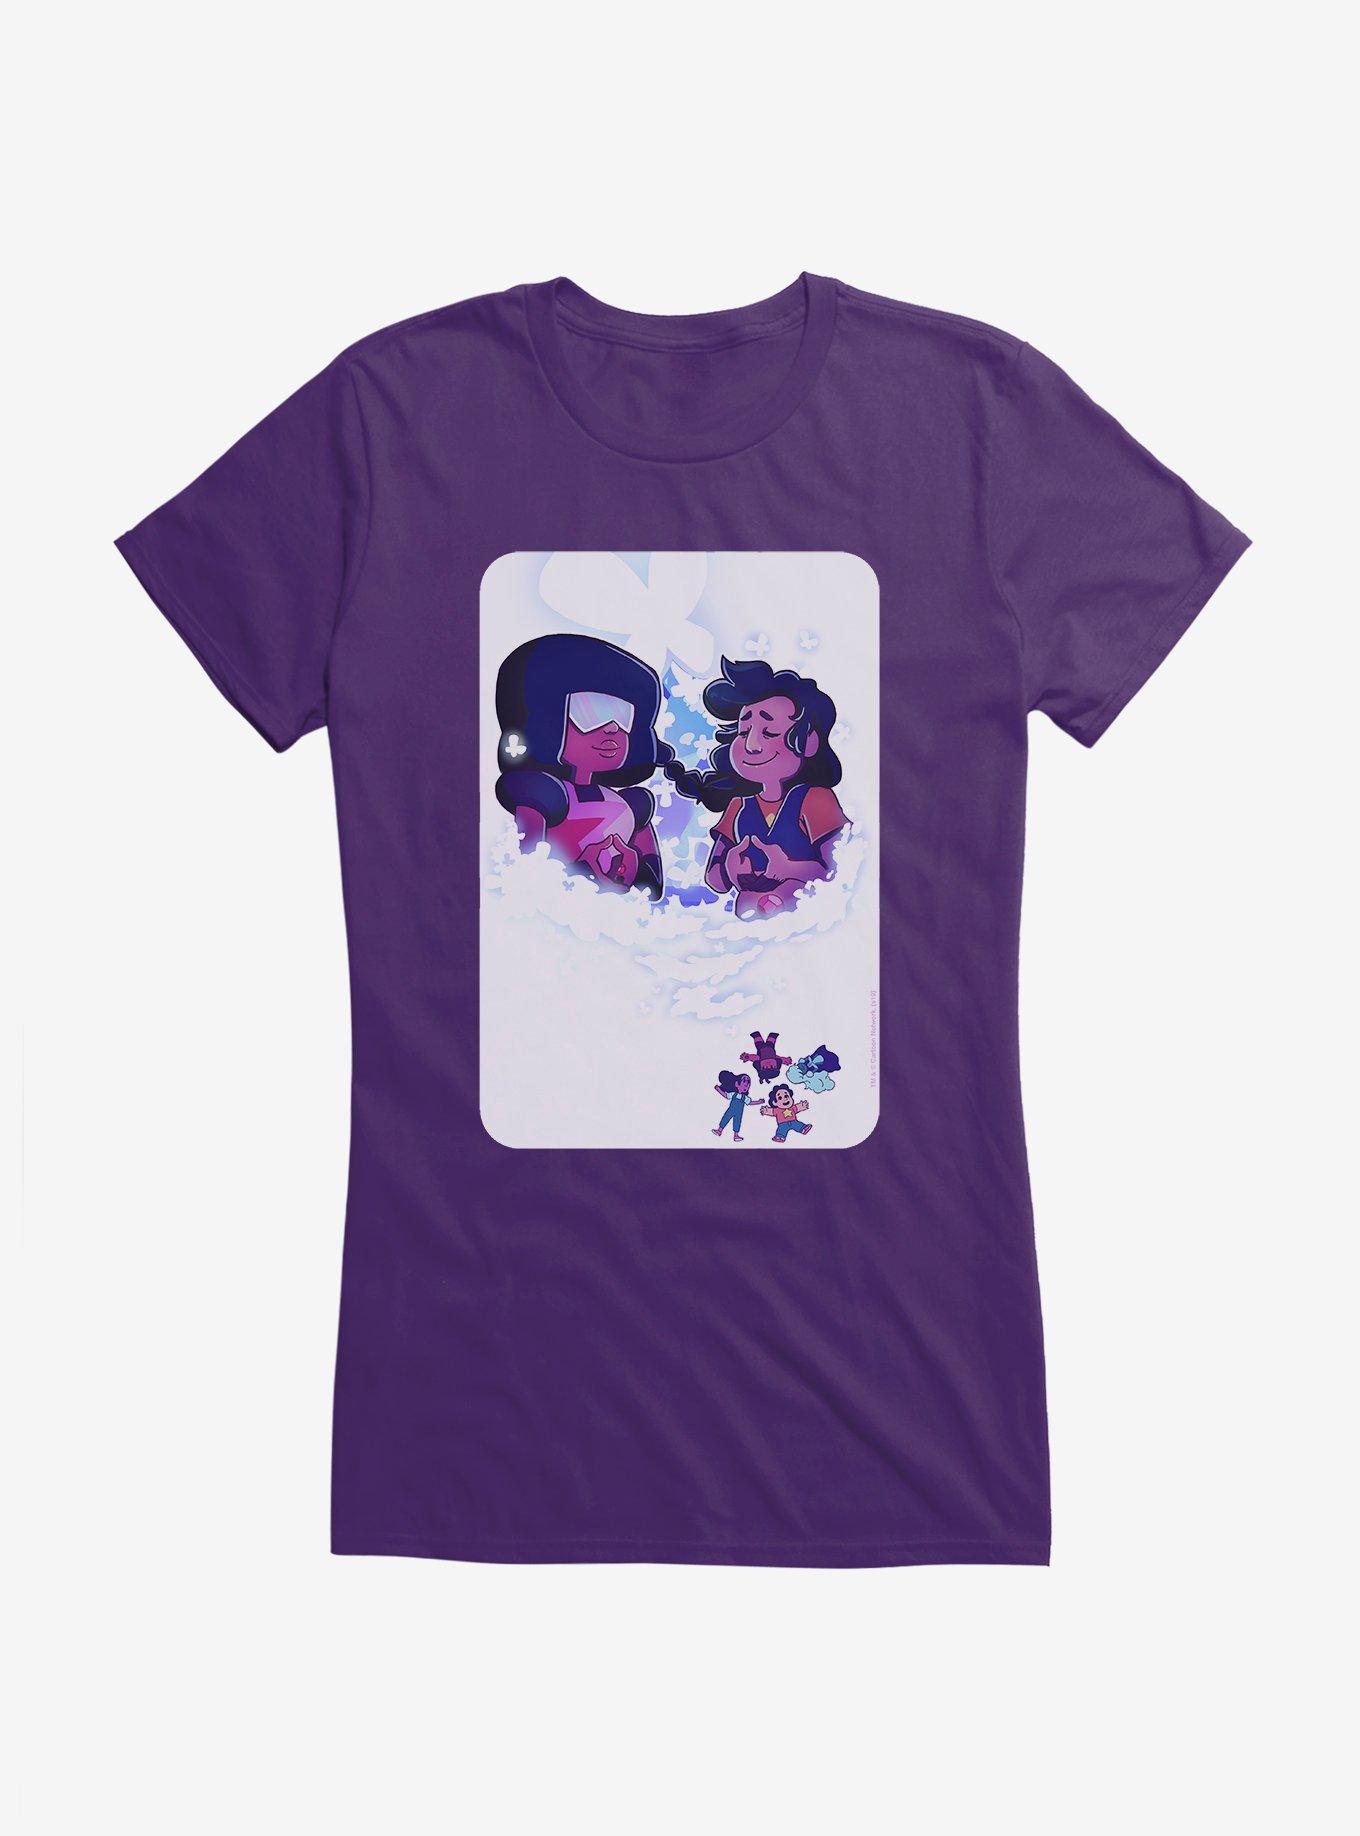 Steven Universe Just A Thought Girls T-Shirt, PURPLE, hi-res